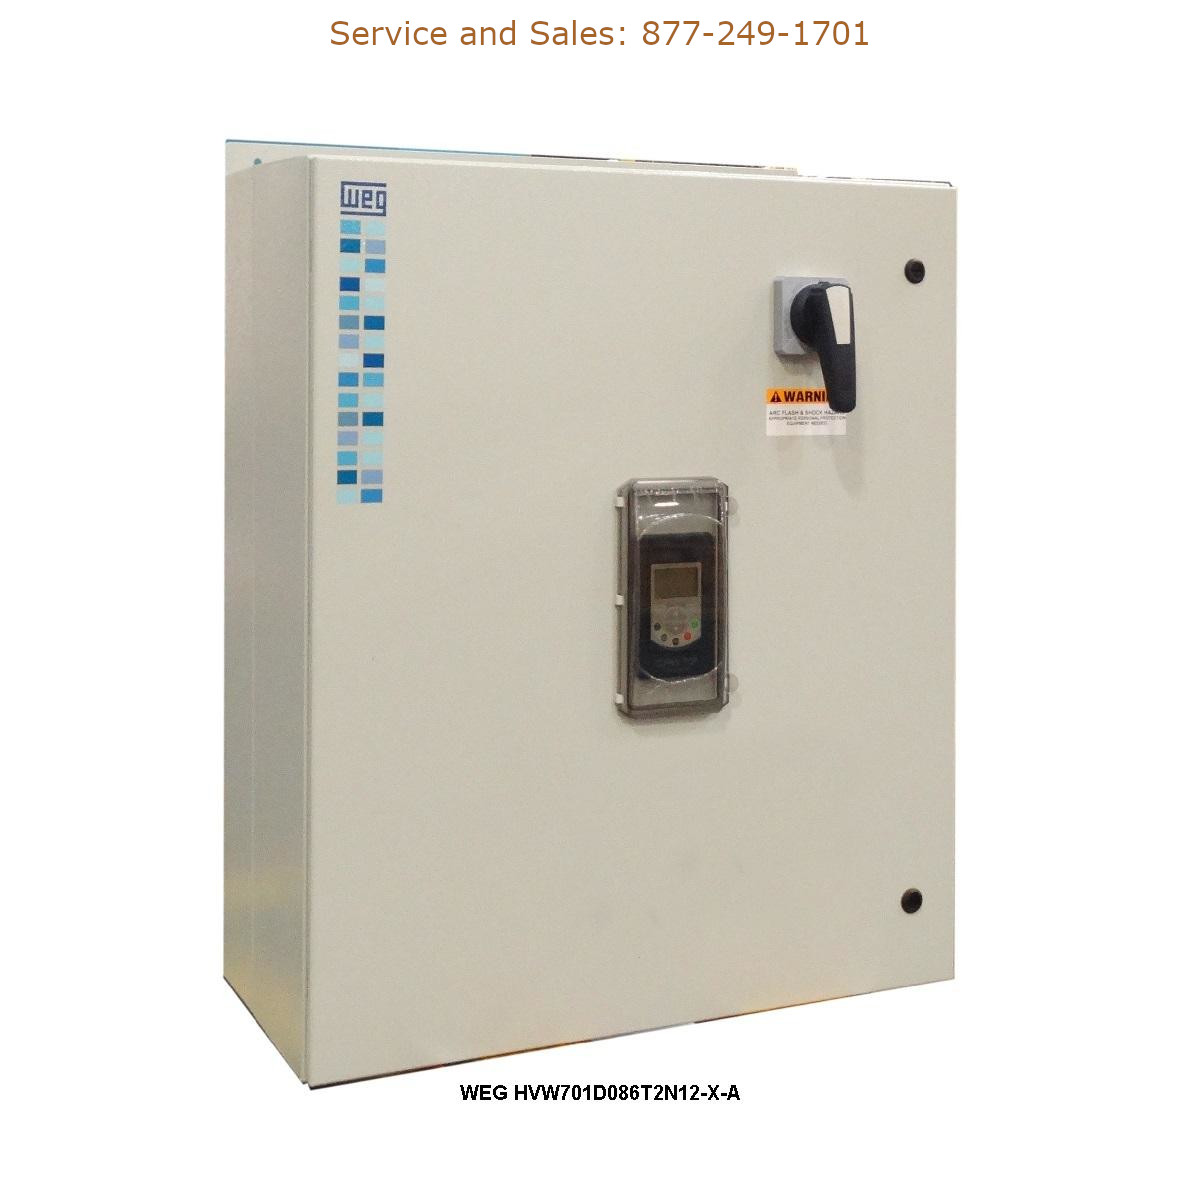 WEG HVW701D086T2N12-X-A WEG Model Number HVW701D086T2N12-X-A WEG Drives, Variable Speed Drives Repair Service, Troubleshooting, Replacement Parts https://gesrepair.com/wp-content/uploads/2022/WEG/WEG_HVW701D086T2N12-X-A_Drives_Variable_Speed_Drives.jpg